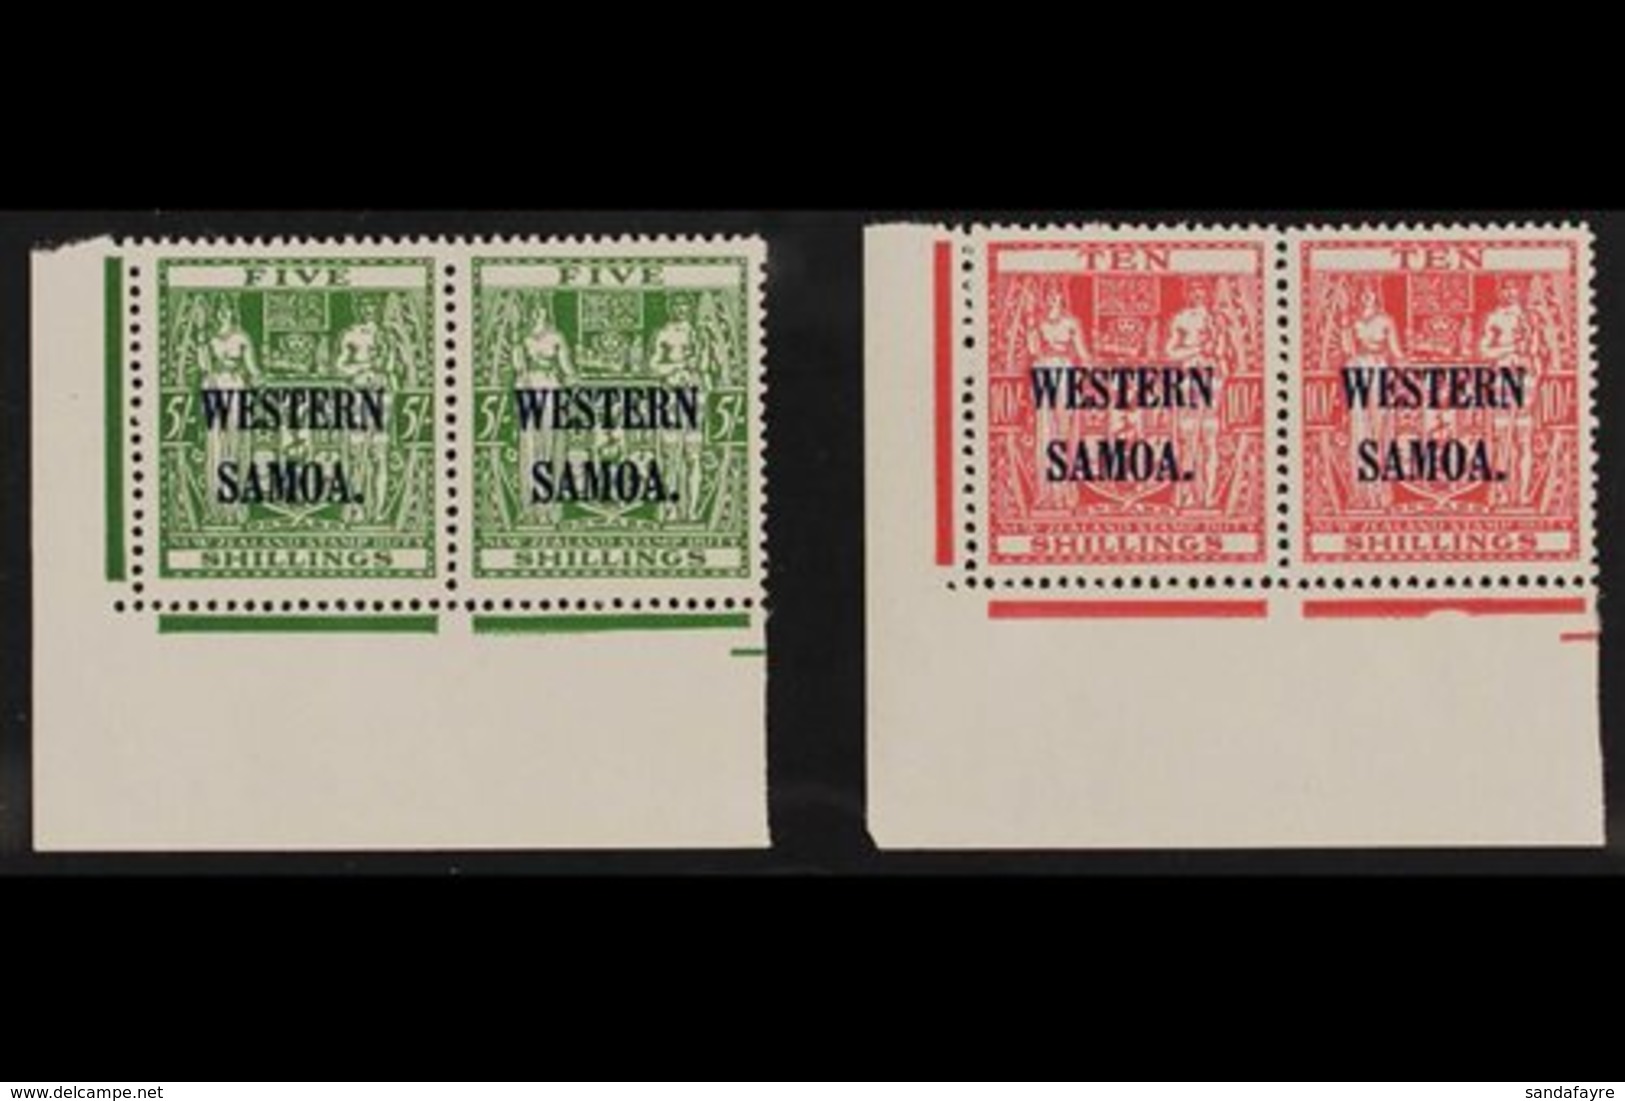 POSTAL FISCAL 1945 "Arms" 5s Green And 10s Carmine-lake, SG 208/09, Never Hinged Mint Corner Pairs. (2 Pairs = 4 Stamps) - Samoa (Staat)